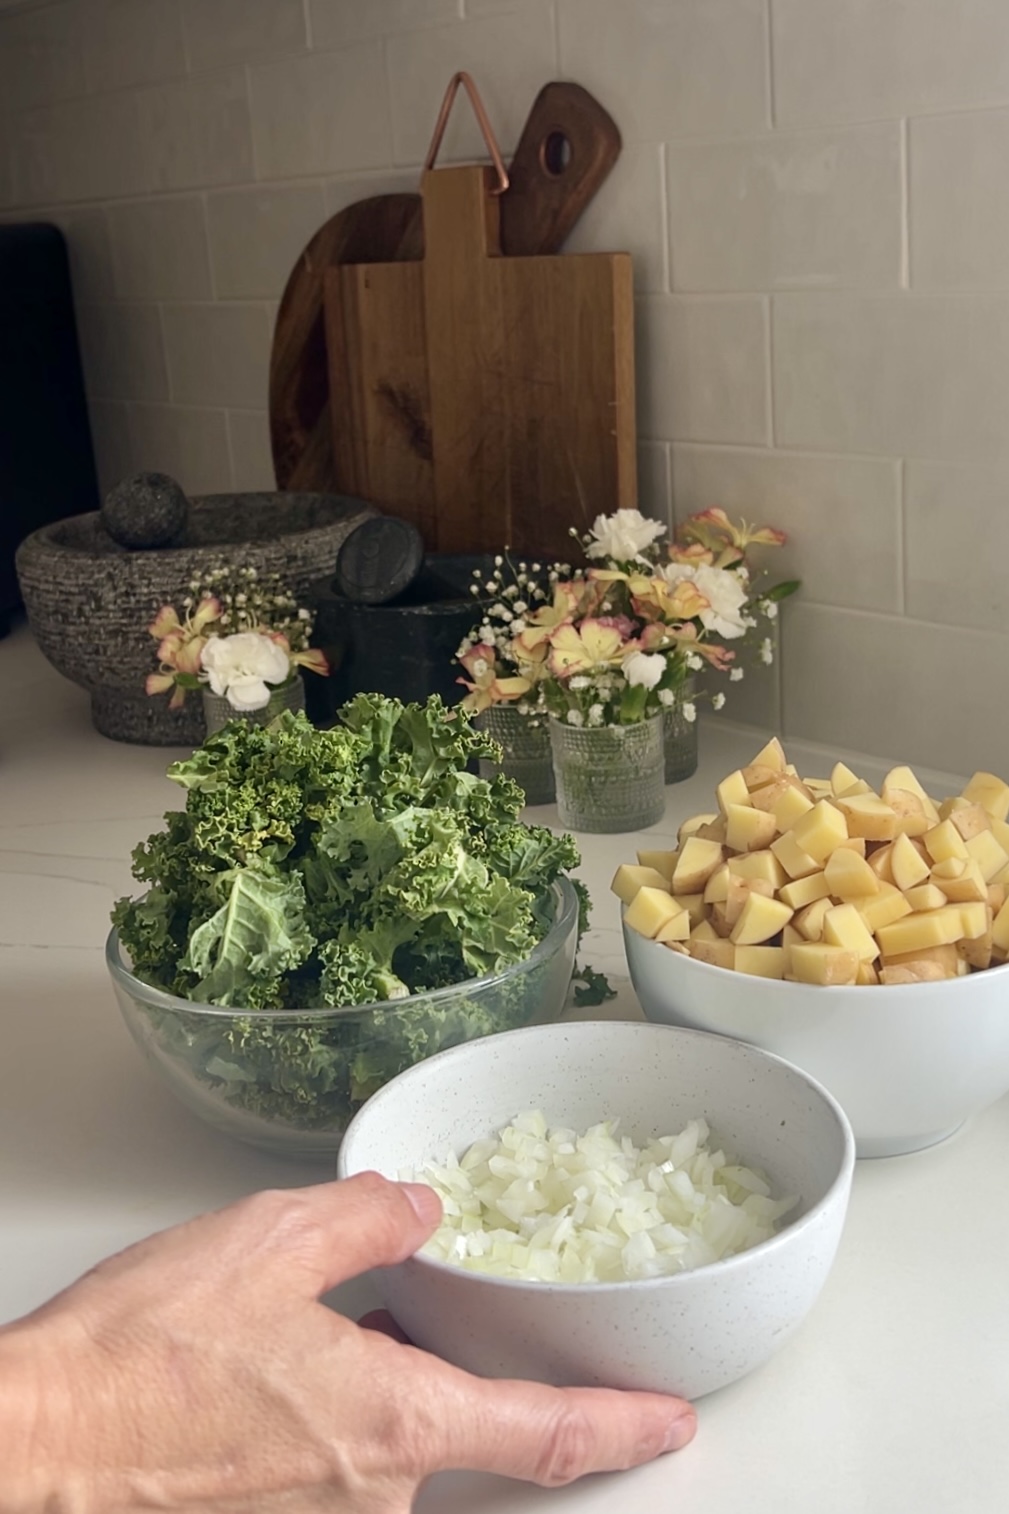 A hand holding a white bowl of chopped onions in the foreground, with other prepared ingredients including diced potatoes for kale potato tacos in a white bowl and kale in a glass bowl. The background features a tiled backsplash, elegant flowers, and wooden cutting boards arranged upright.